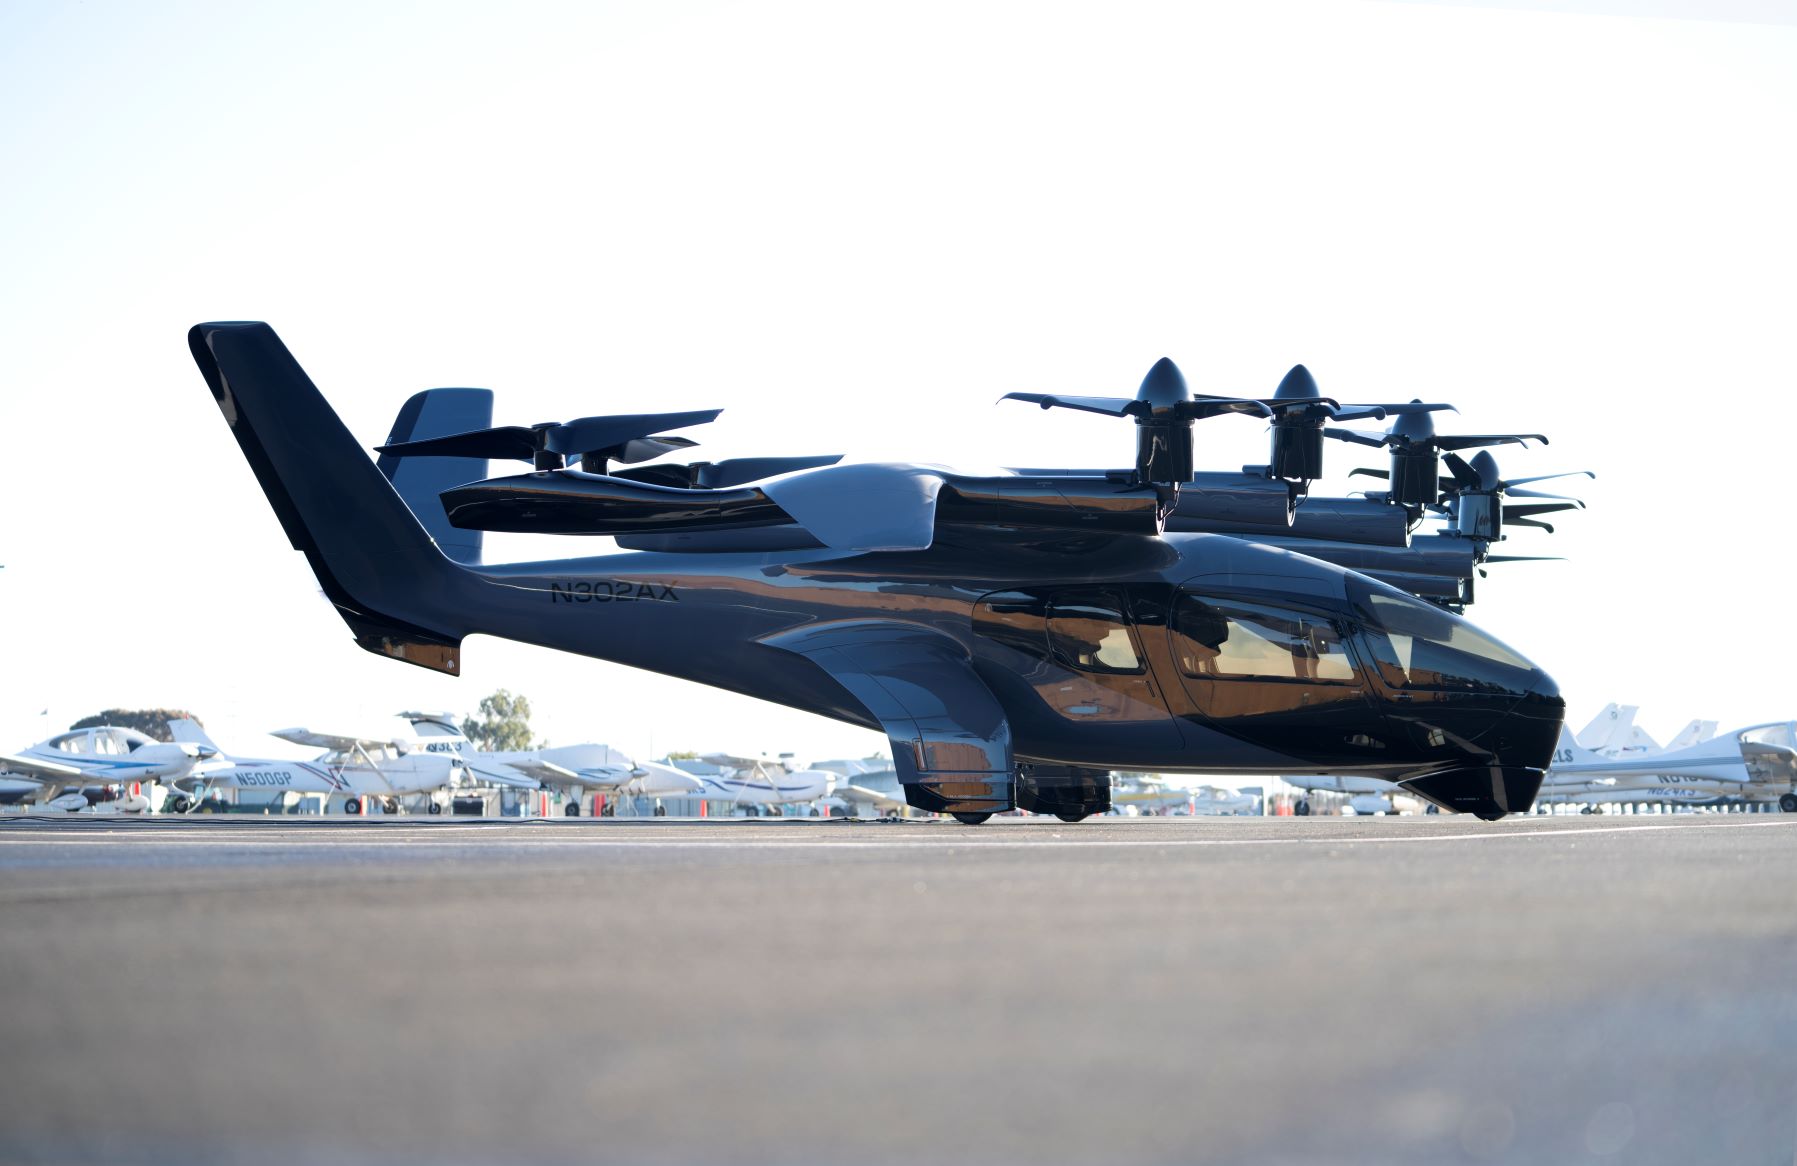 Side view of the Archer Midnight eVTOL aircraft